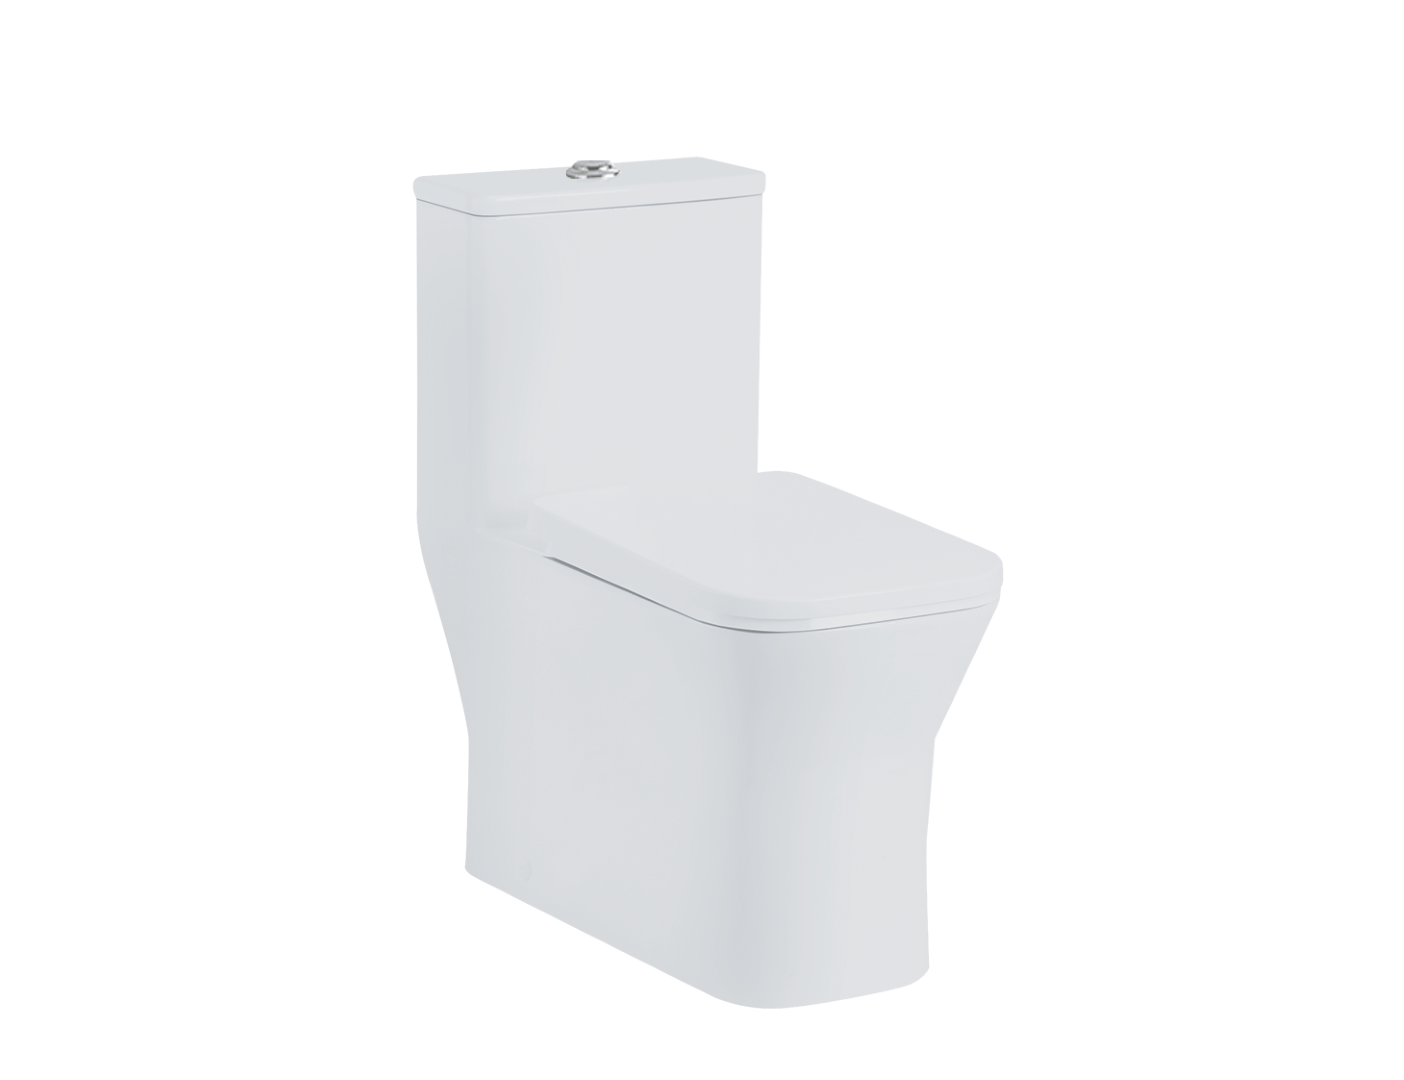 MJ3099-One Piece Toilet Elongated Floor Mounted